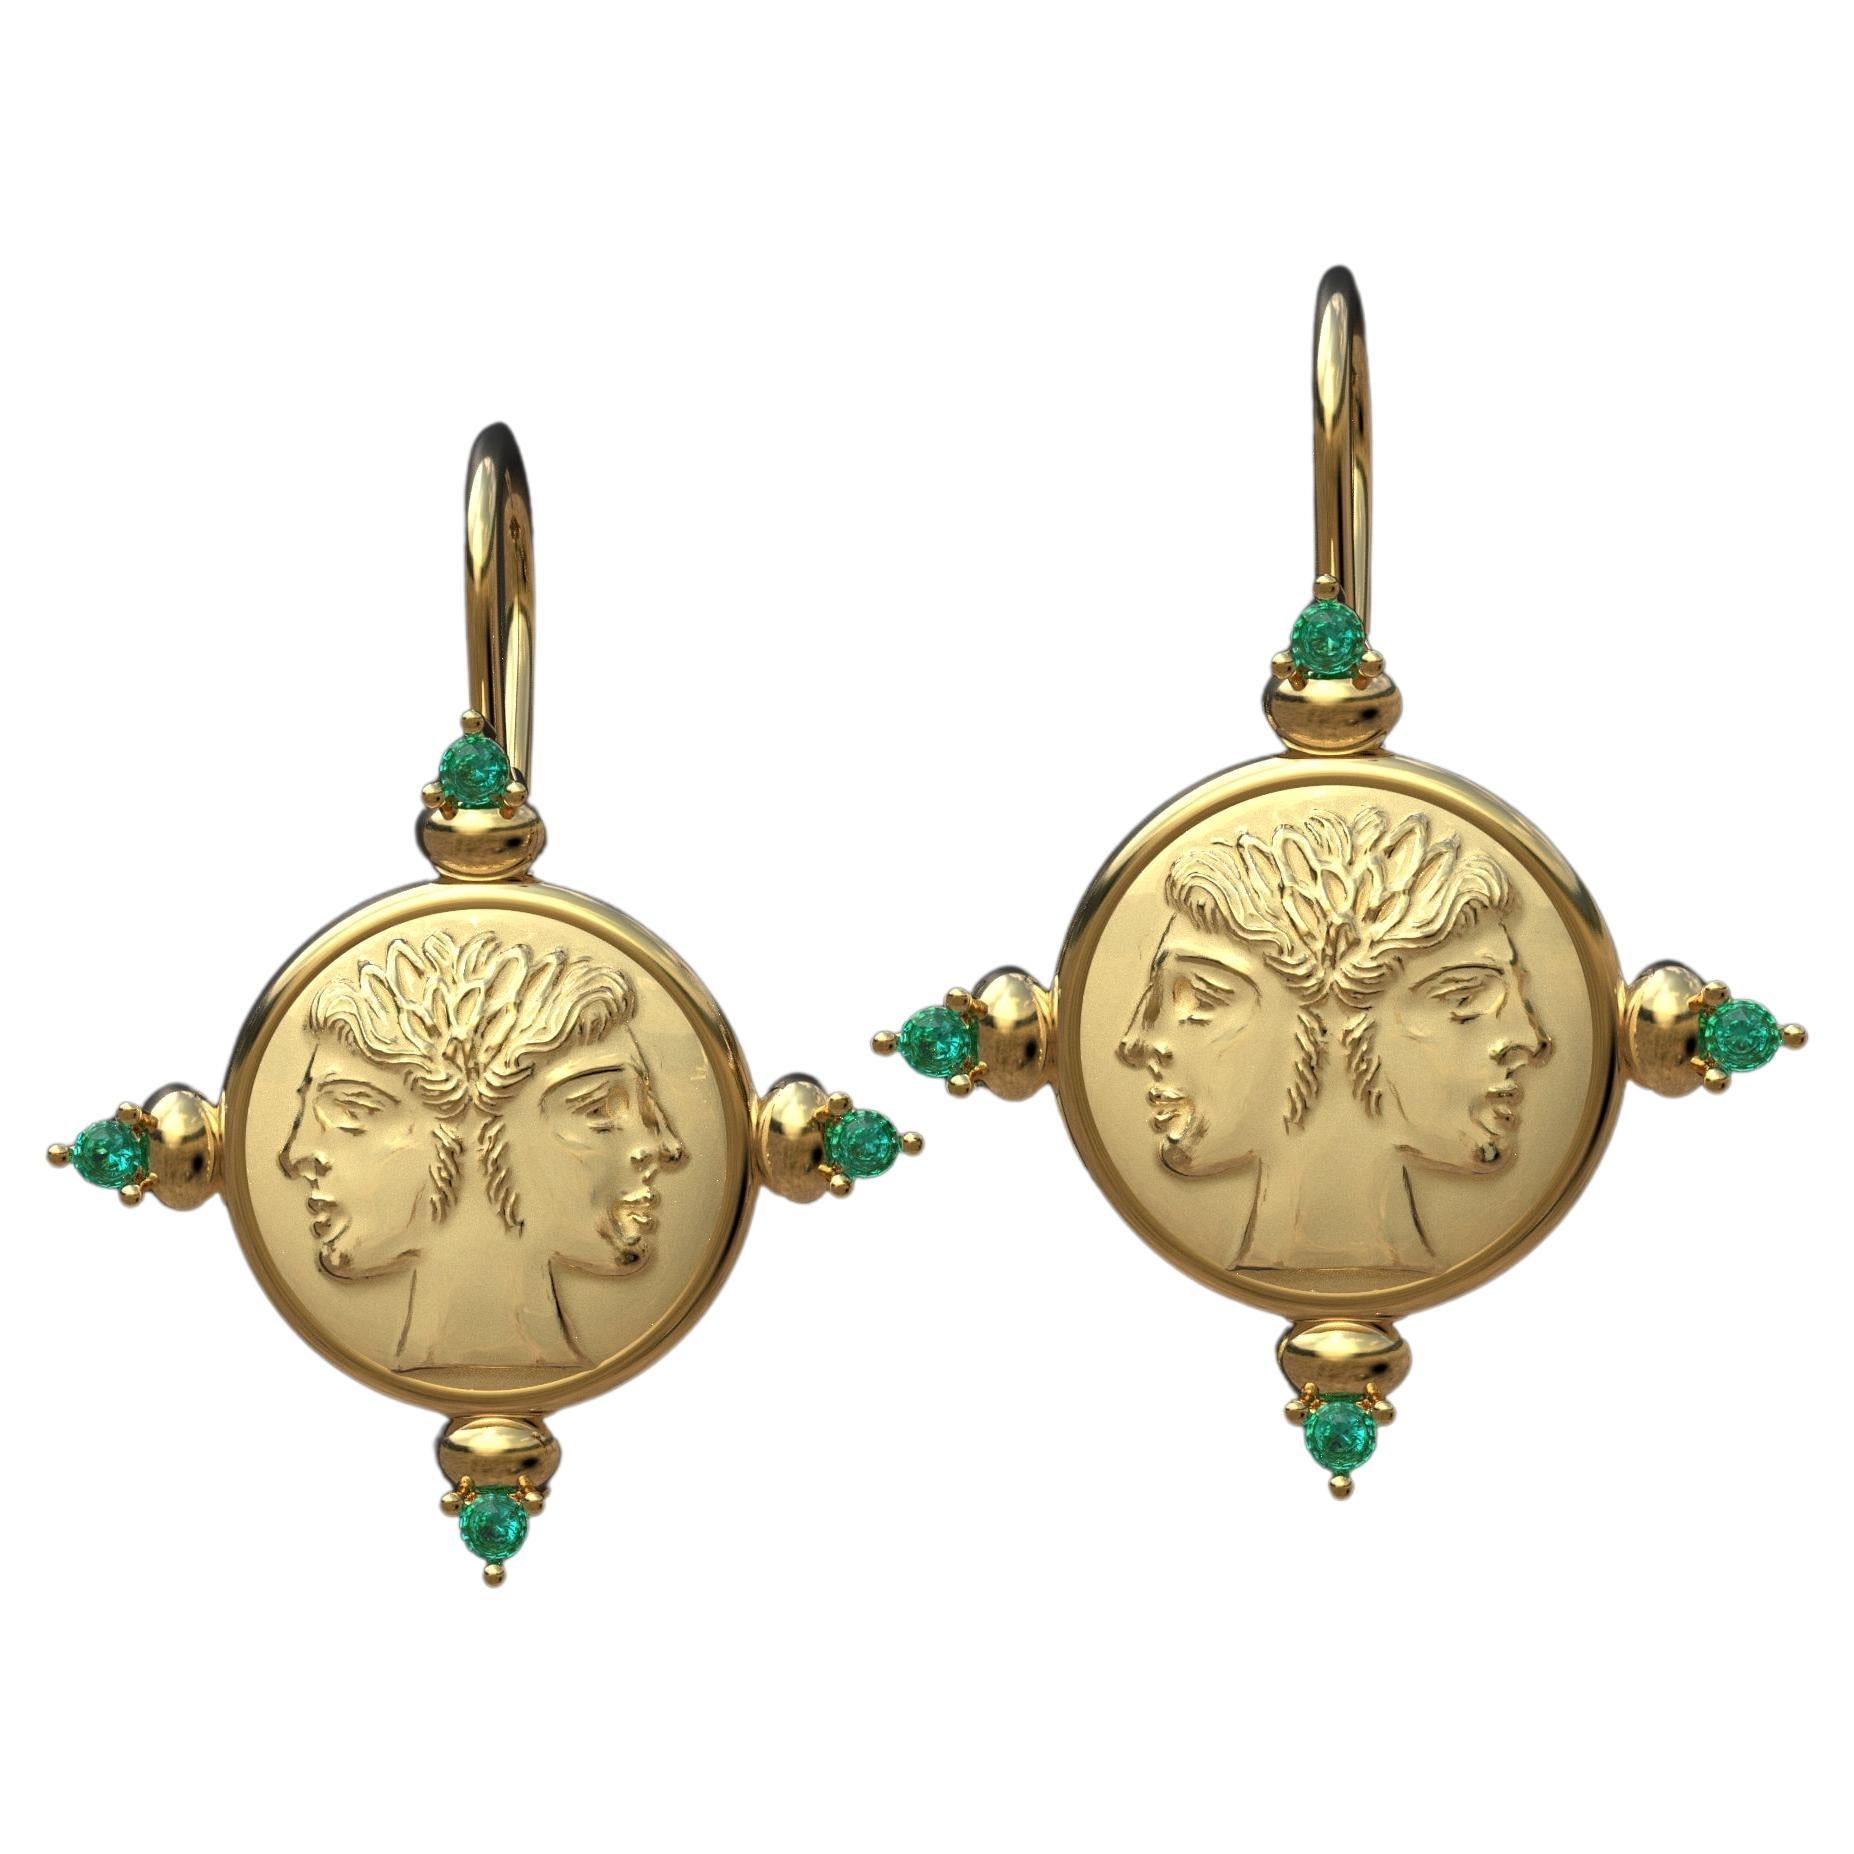 Italian 14k Gold Earrings in ancient Roman Style with Emeralds, made to order